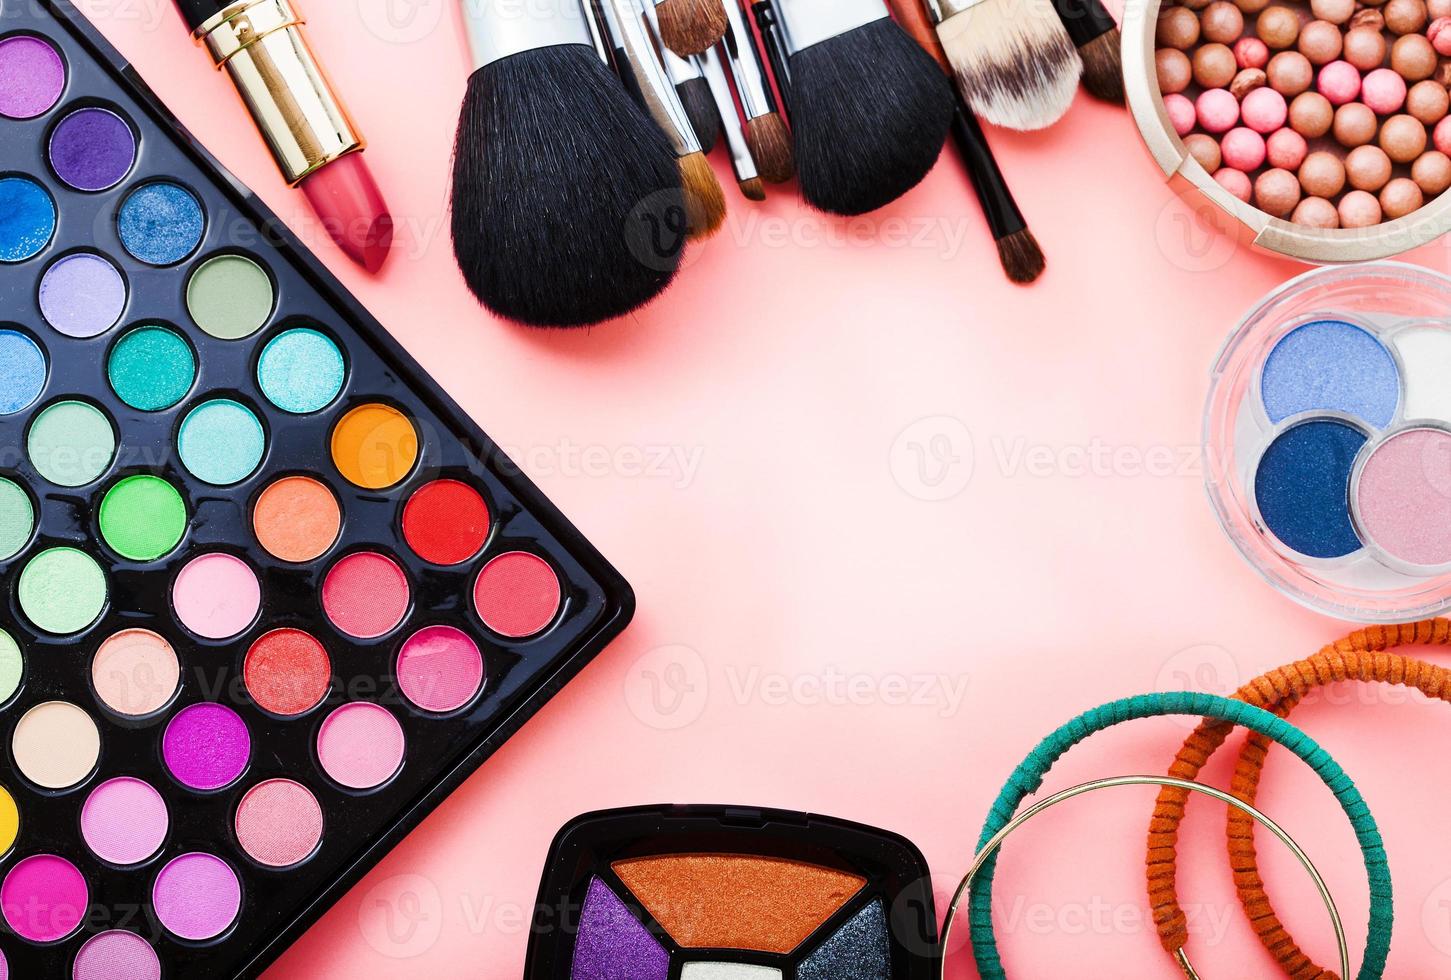 Frame of cosmetic accessories on pink background with copy space. Top view photo